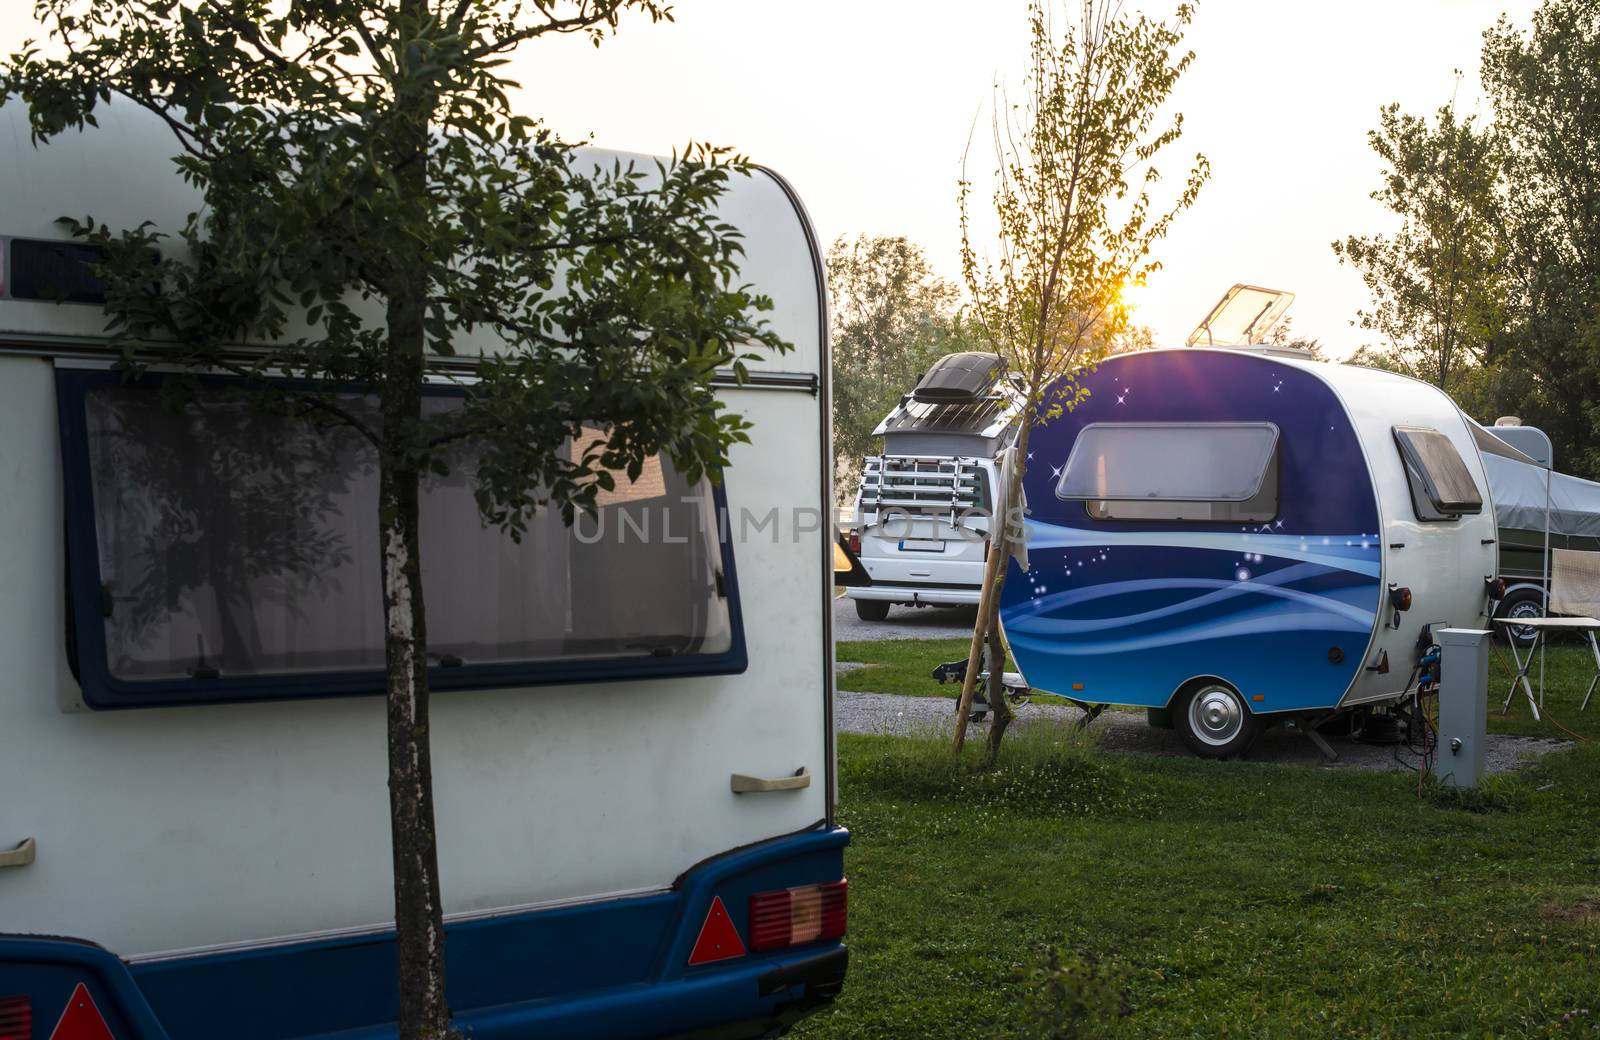 Caravans and campers on green meadow in campsite. Sunrise, rays on campers in the morning. Green grass. Outdoor concept for traveling and res in the nature.